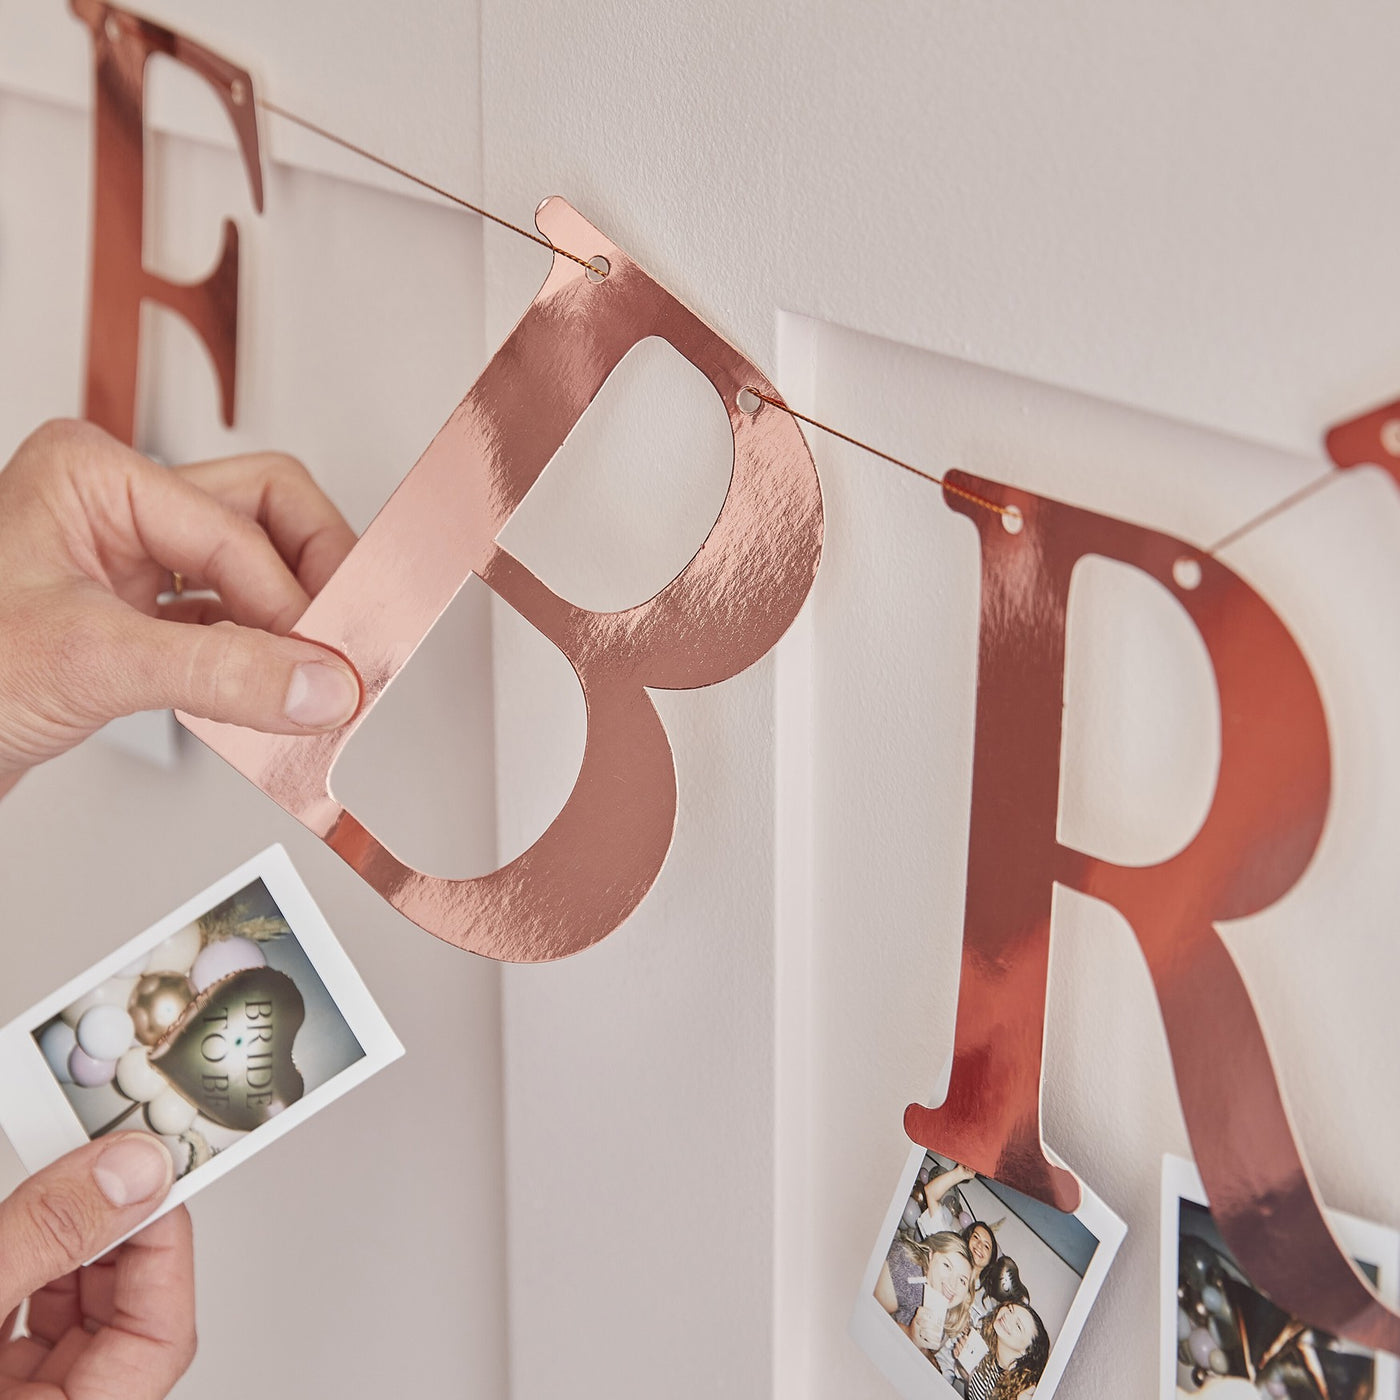 Rose Gold The Bride Hen Party Bunting